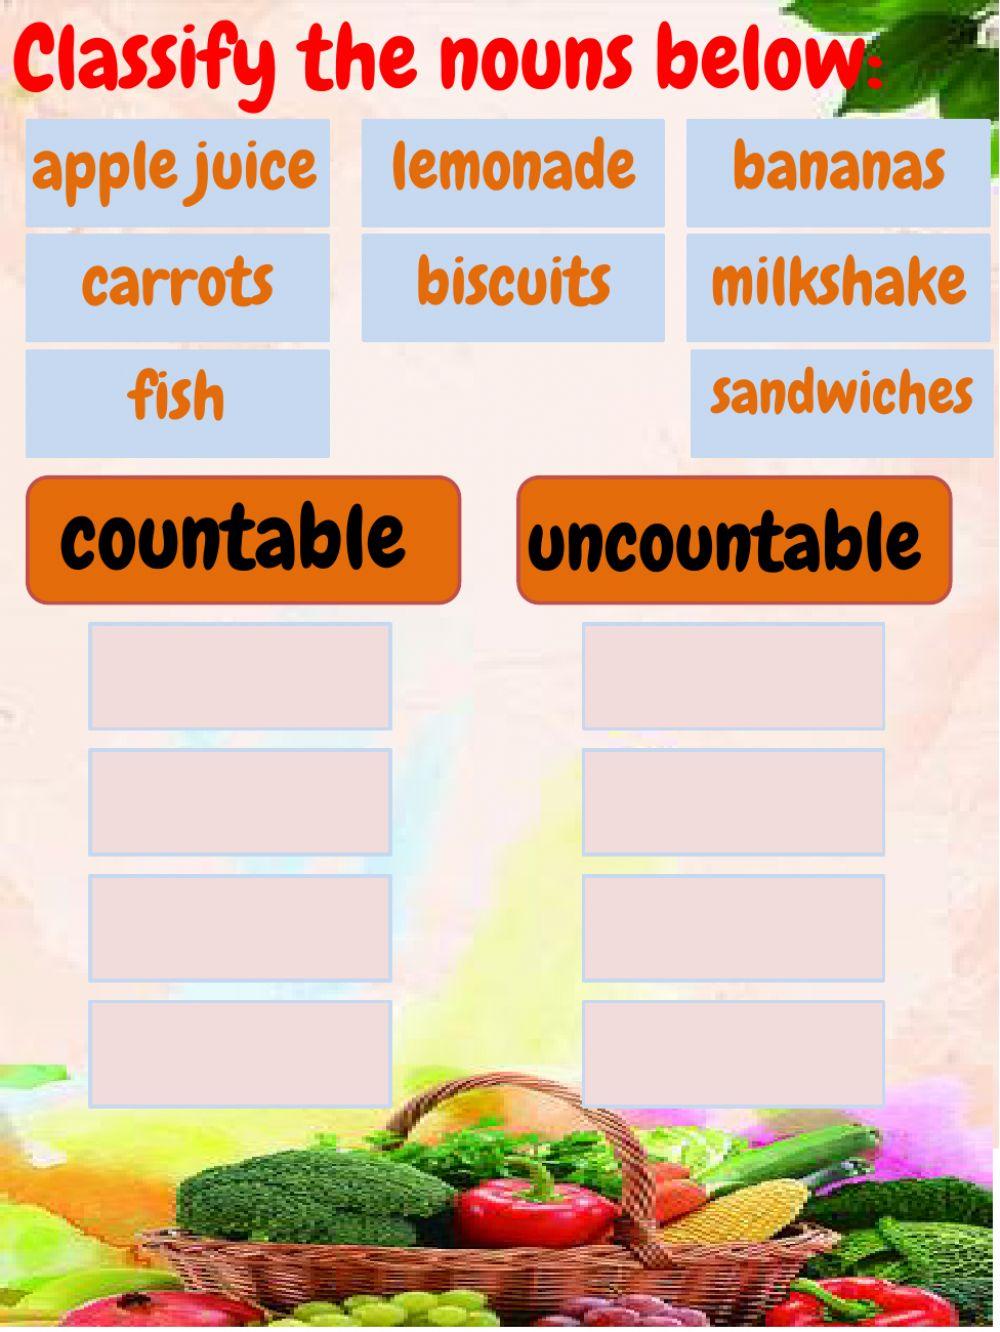 Countables & uncountable